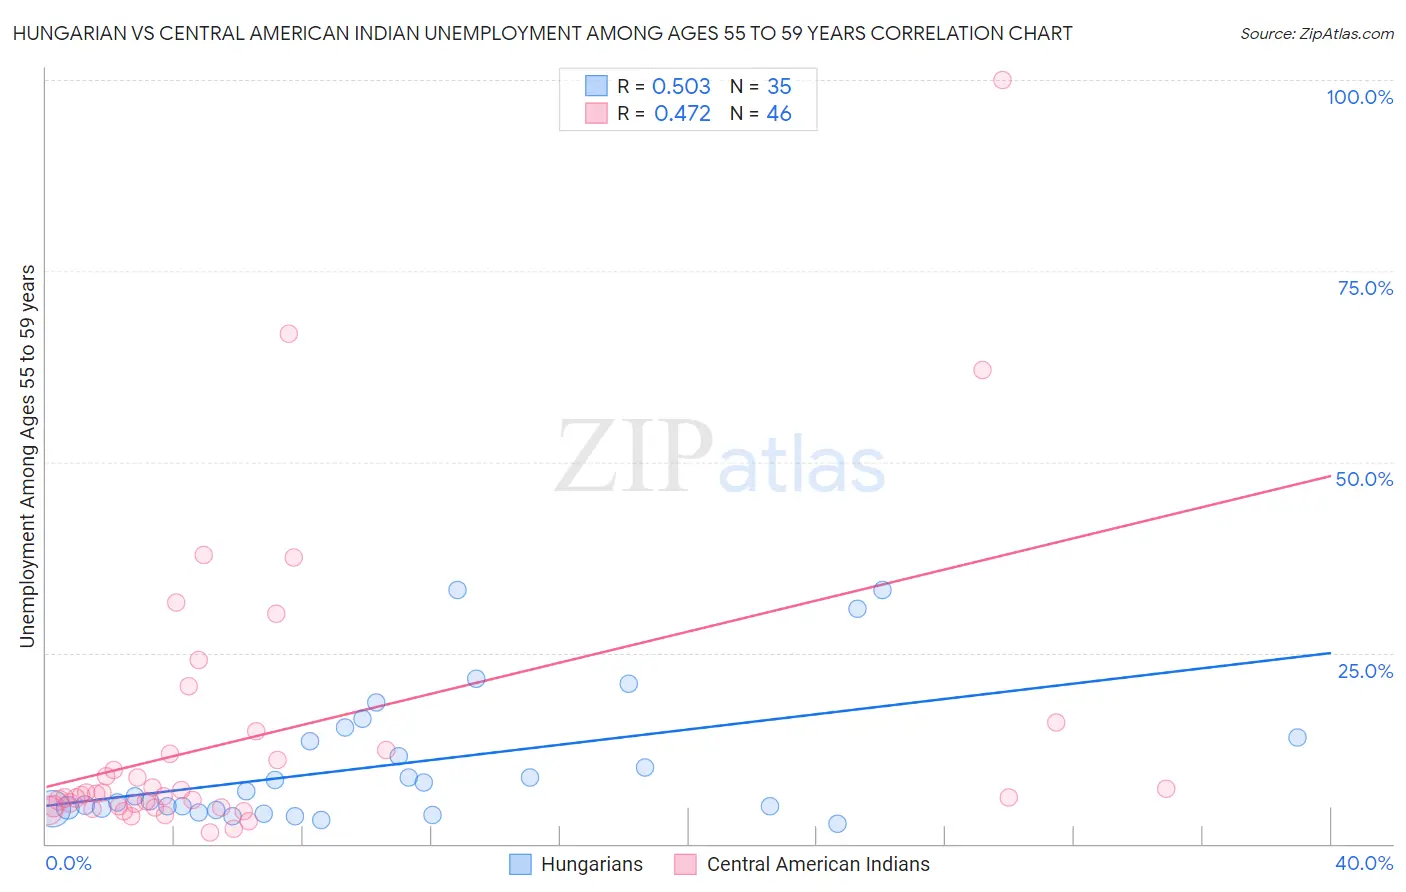 Hungarian vs Central American Indian Unemployment Among Ages 55 to 59 years